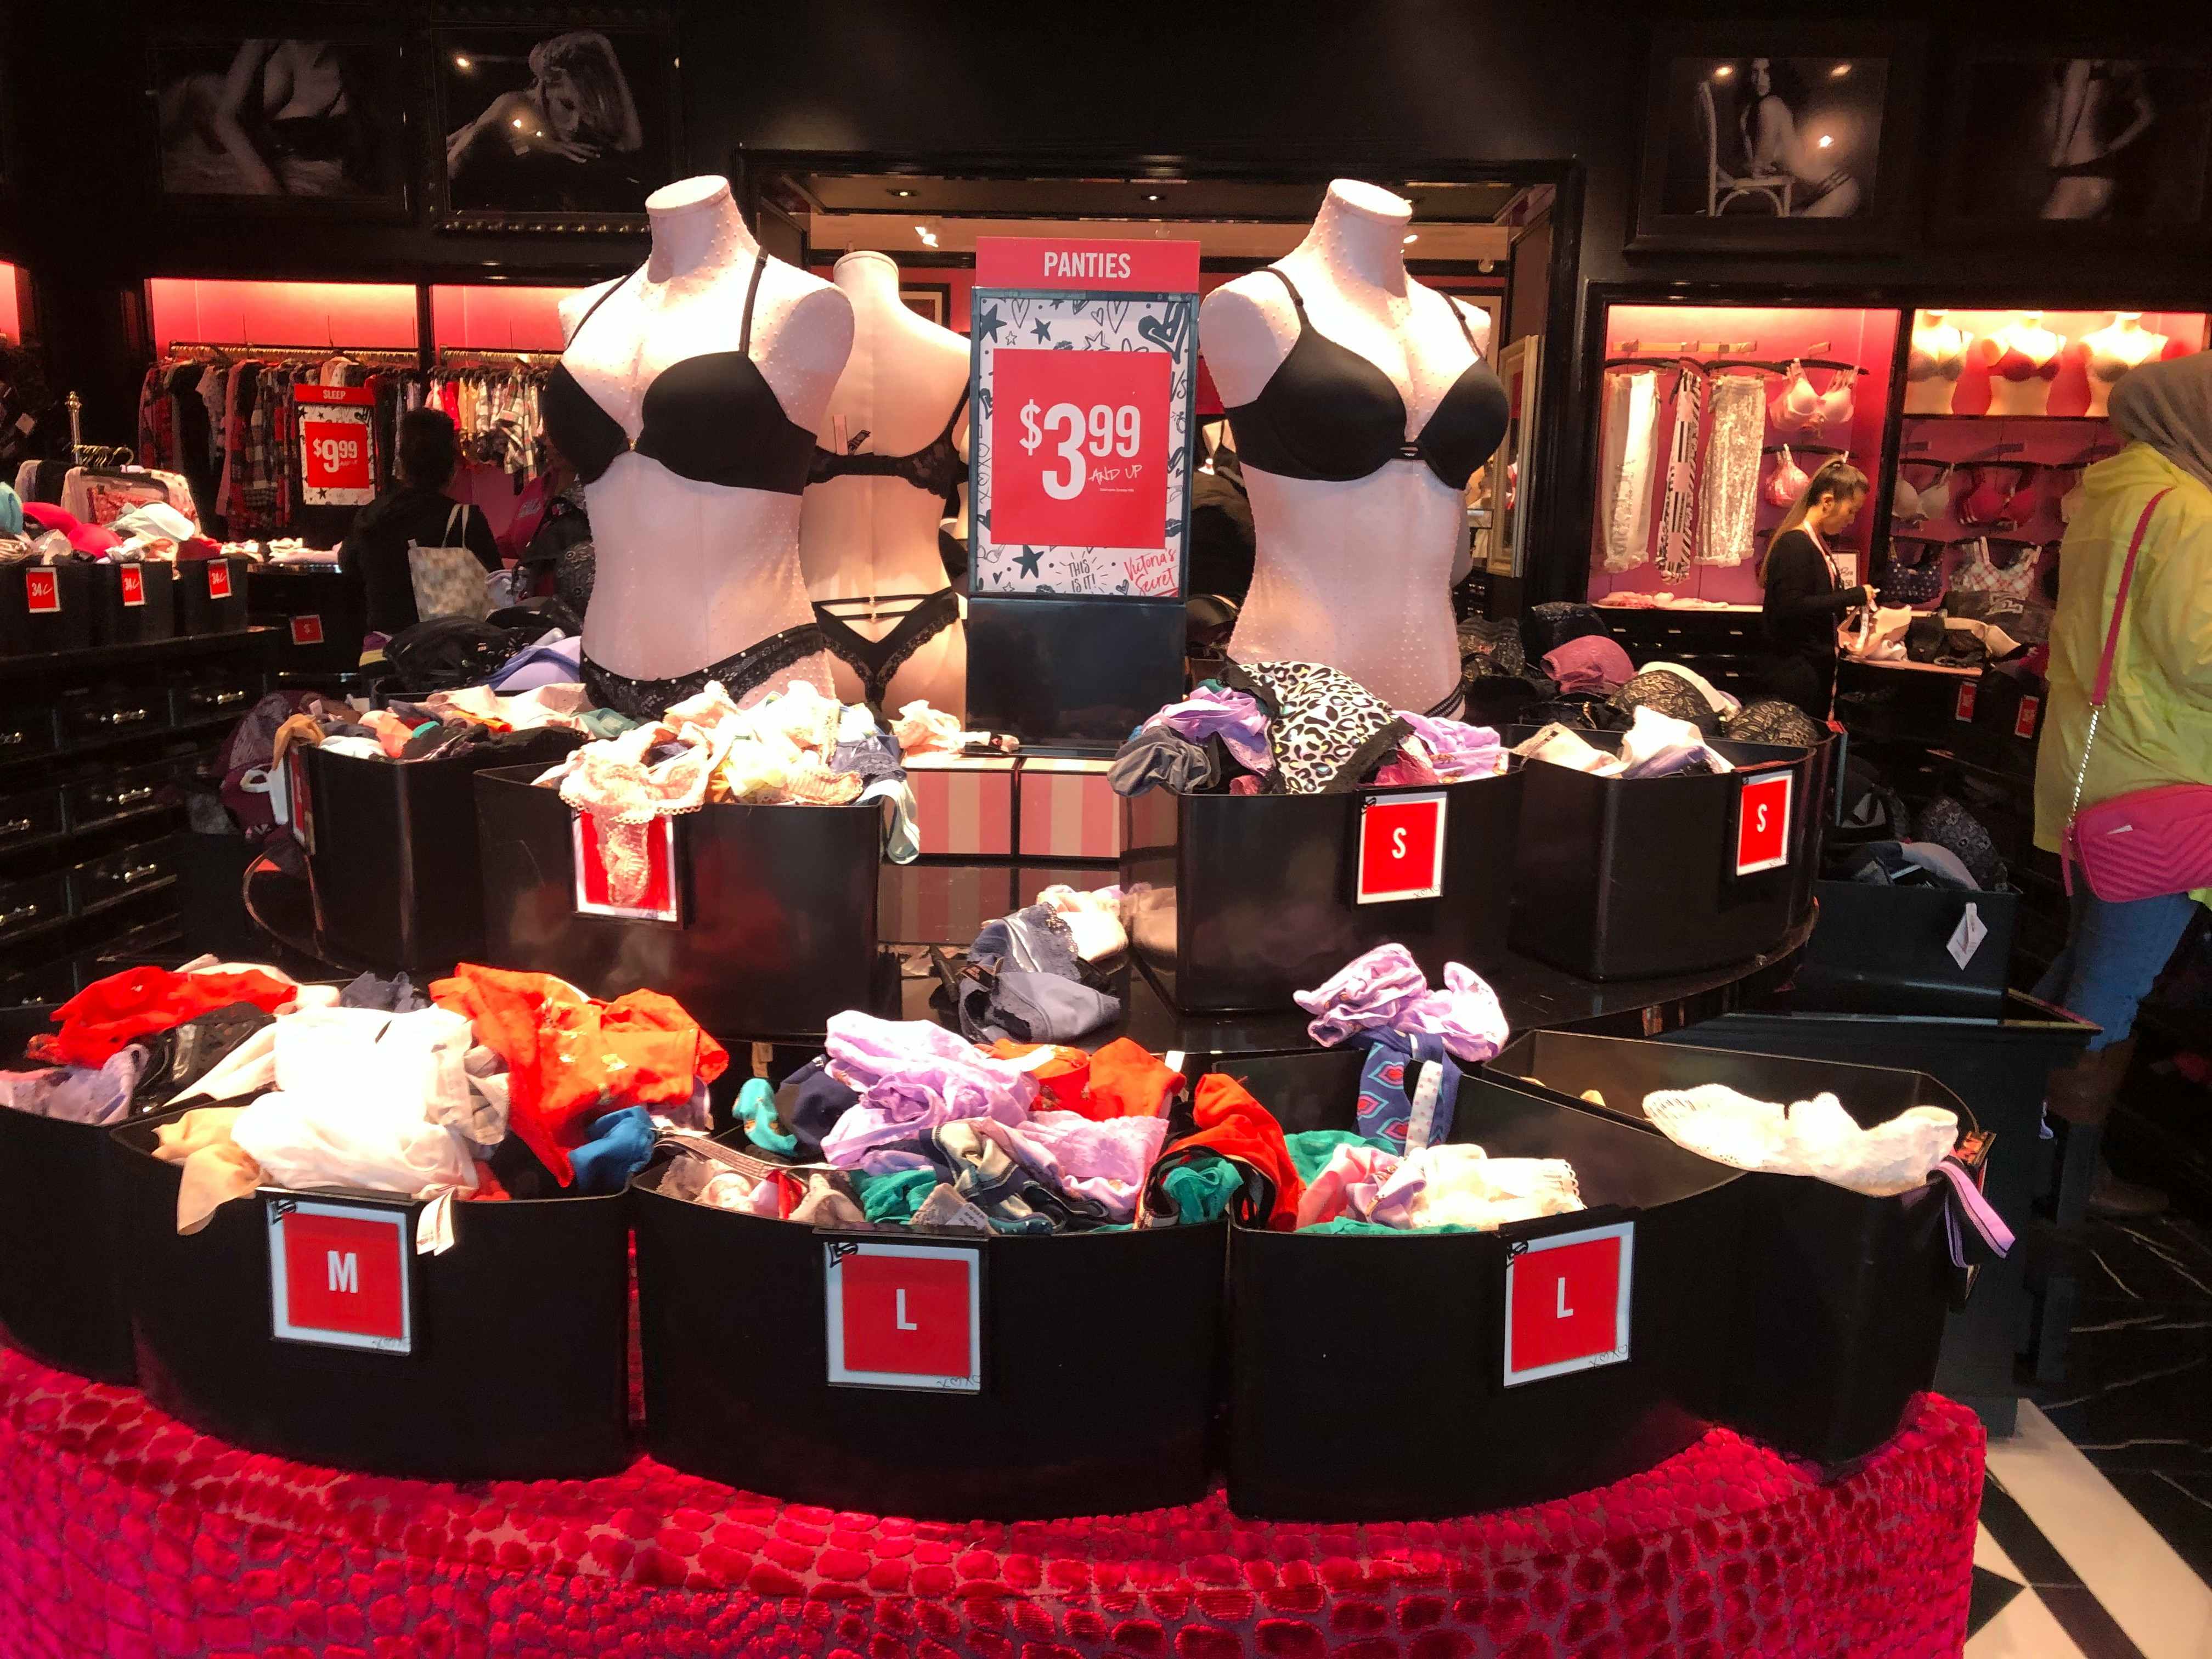 Victoria's Secret Lingerie for sale in Knoxville, Kentucky